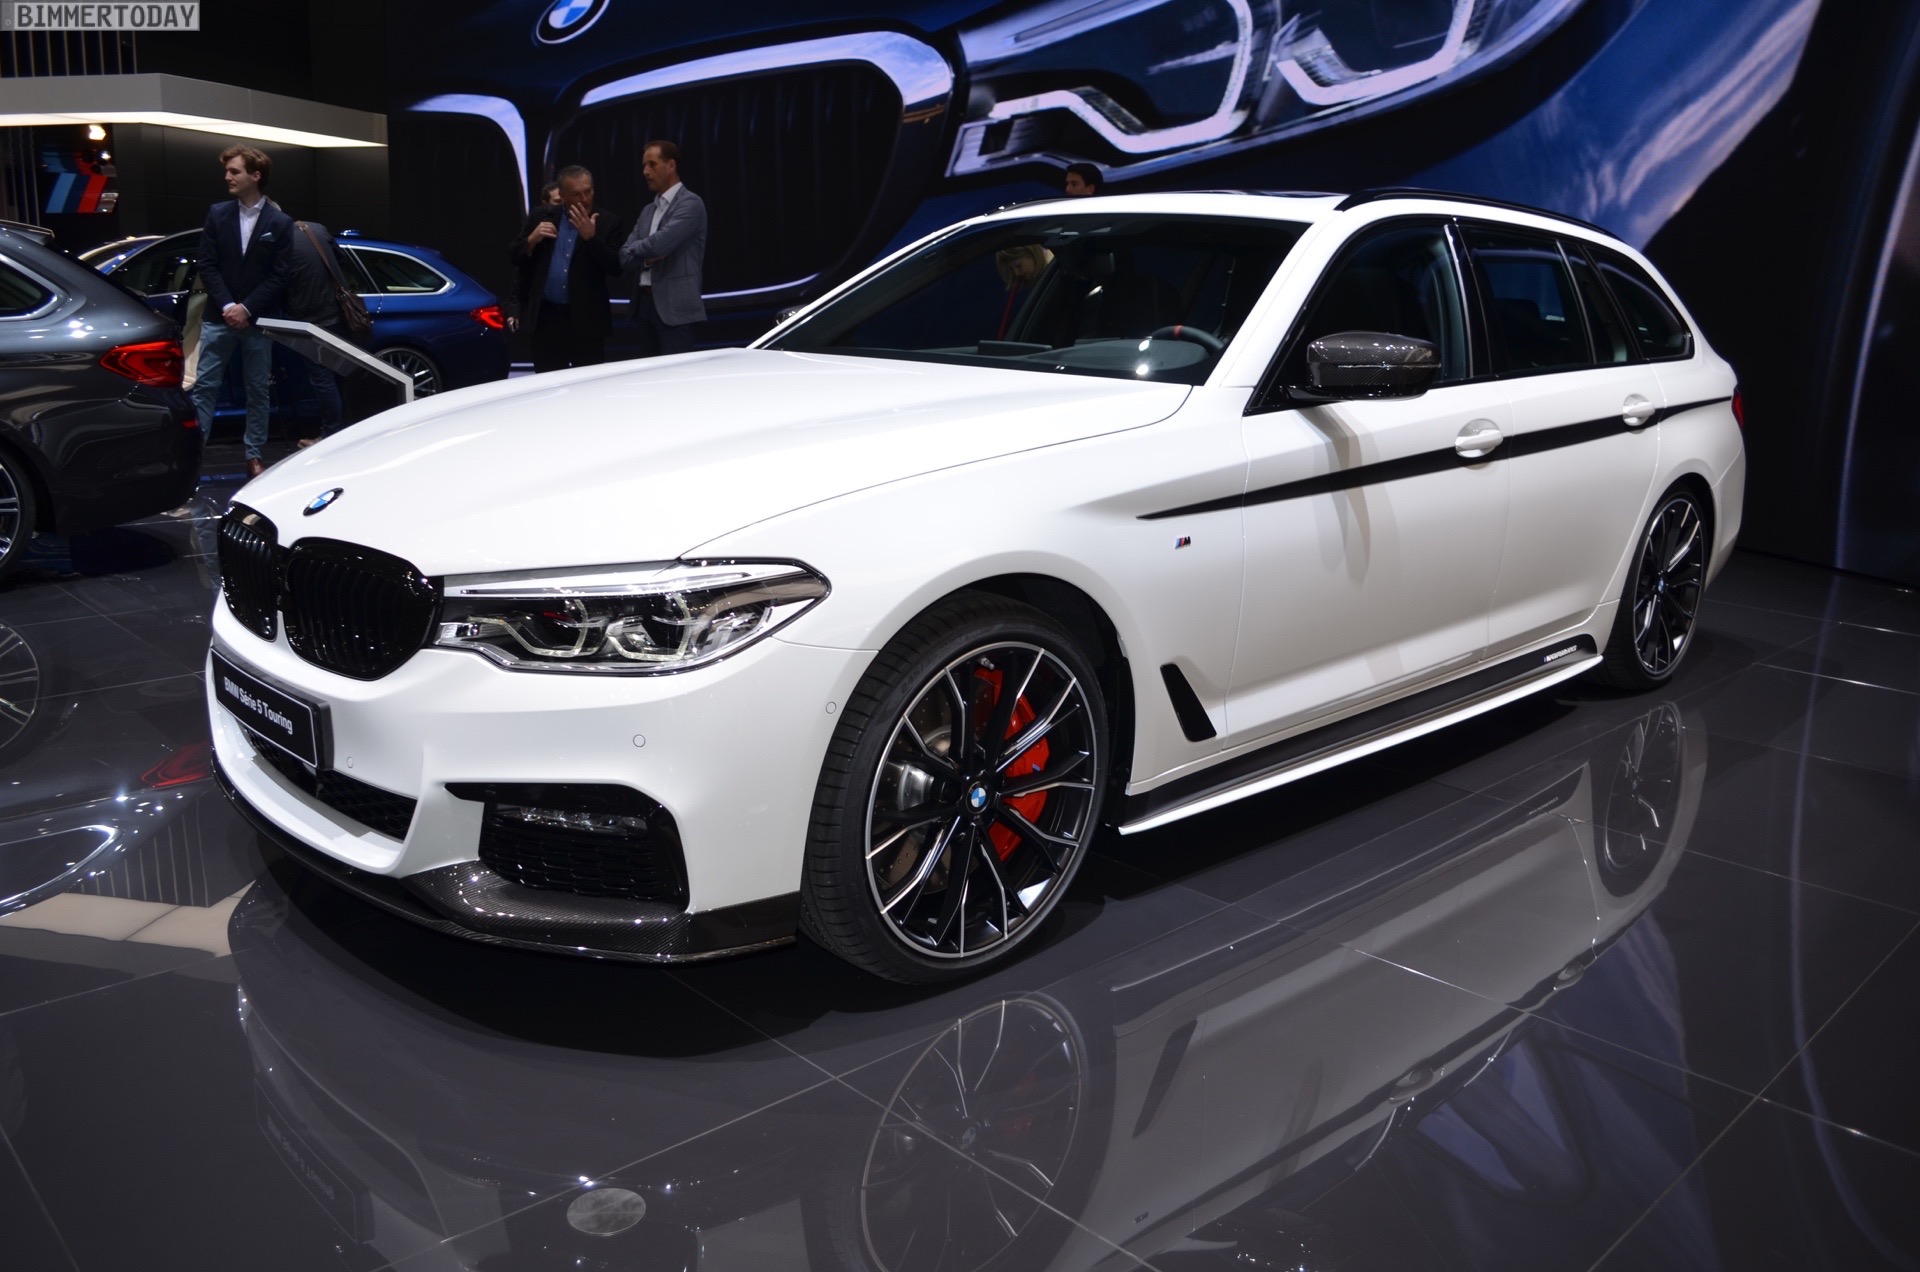 2017 Geneva: BMW 5 Series Touring debuts with M Performance Parts